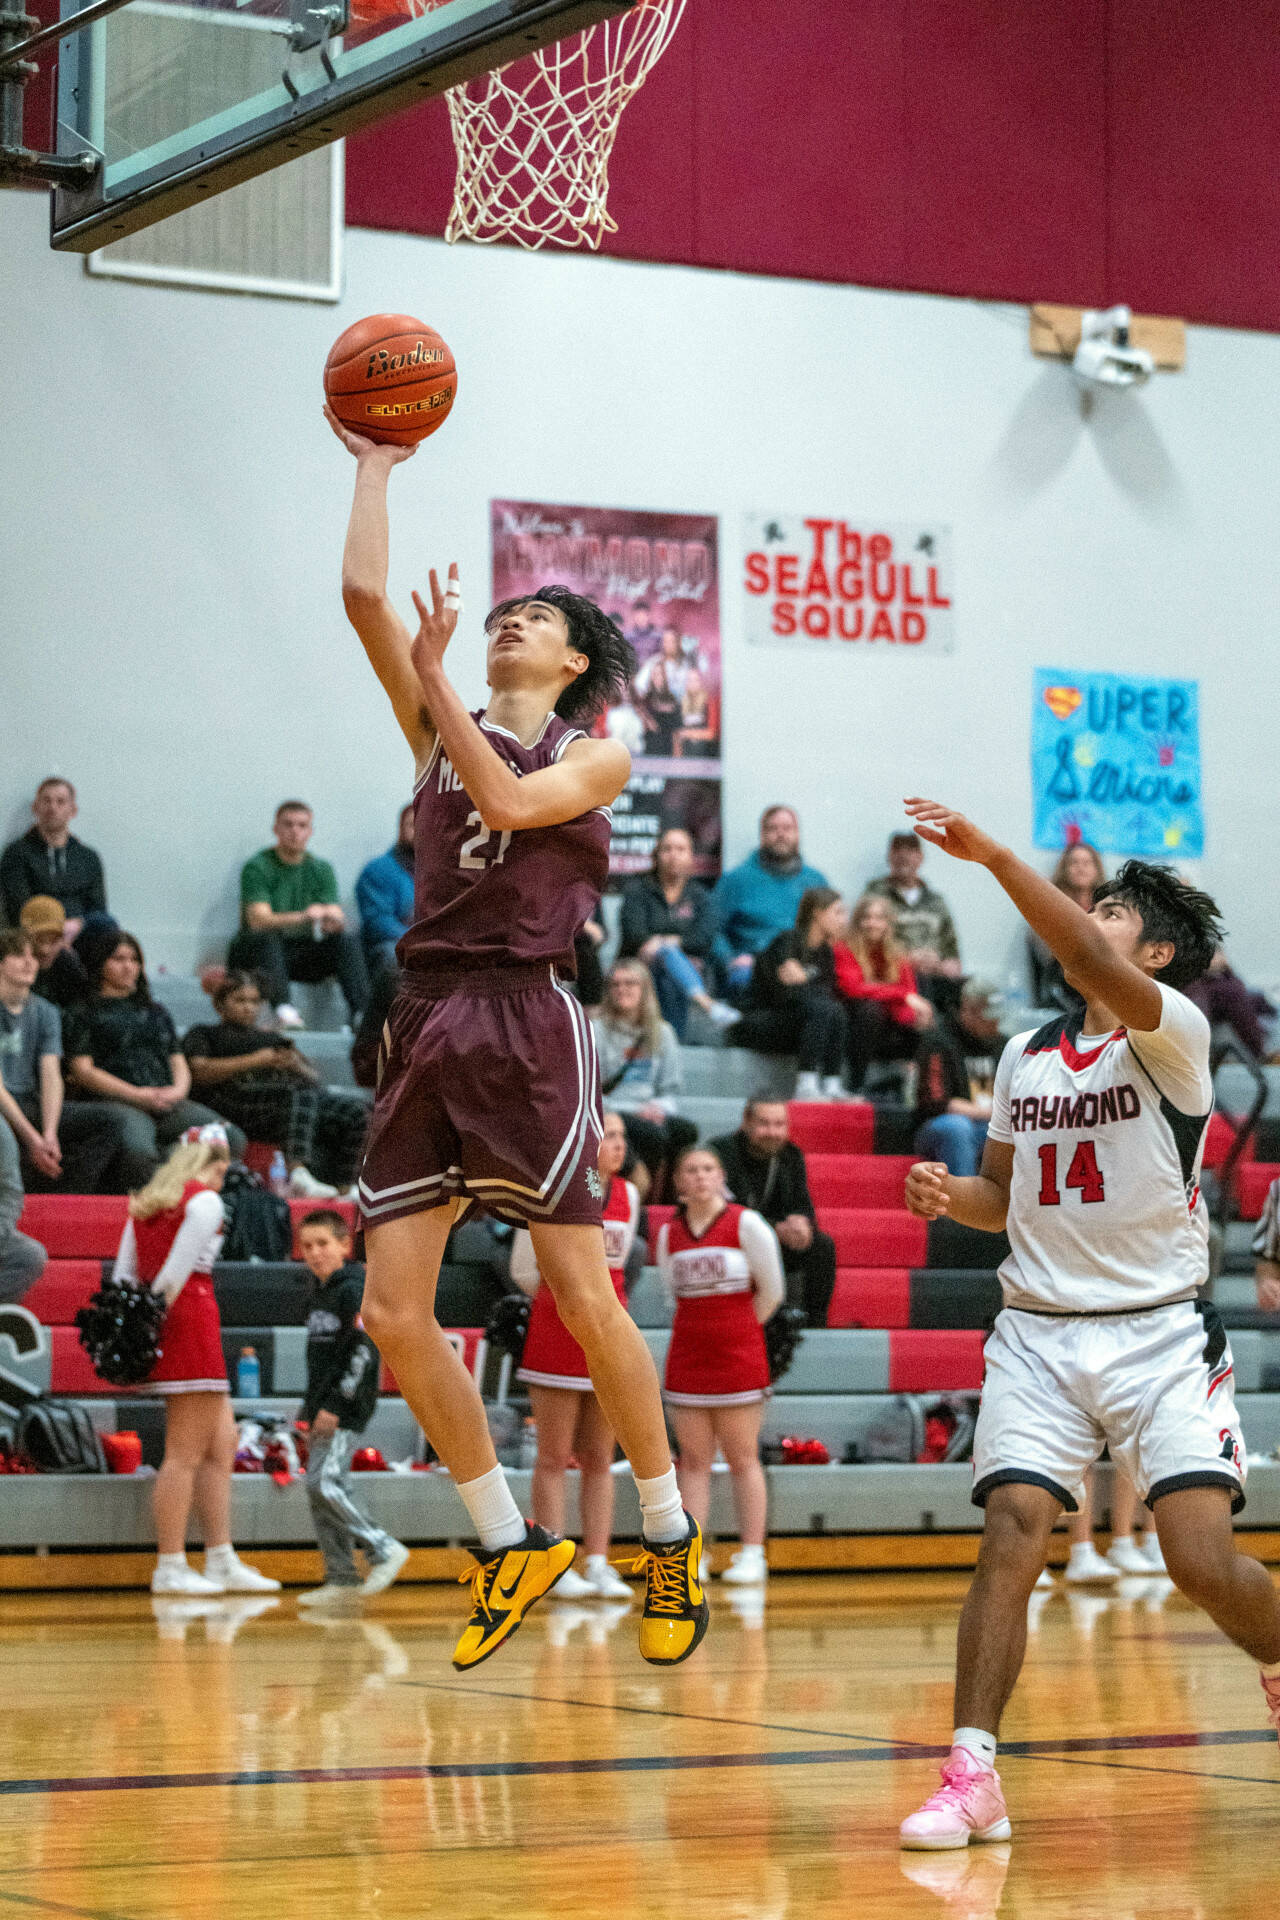 PHOTO BY FOREST WORGUM Montesano guard Delon Chan, left, scores on a layup during a 67-47 win over Raymond on Saturday at Raymond High School. Chan scored 24 points in the victory.